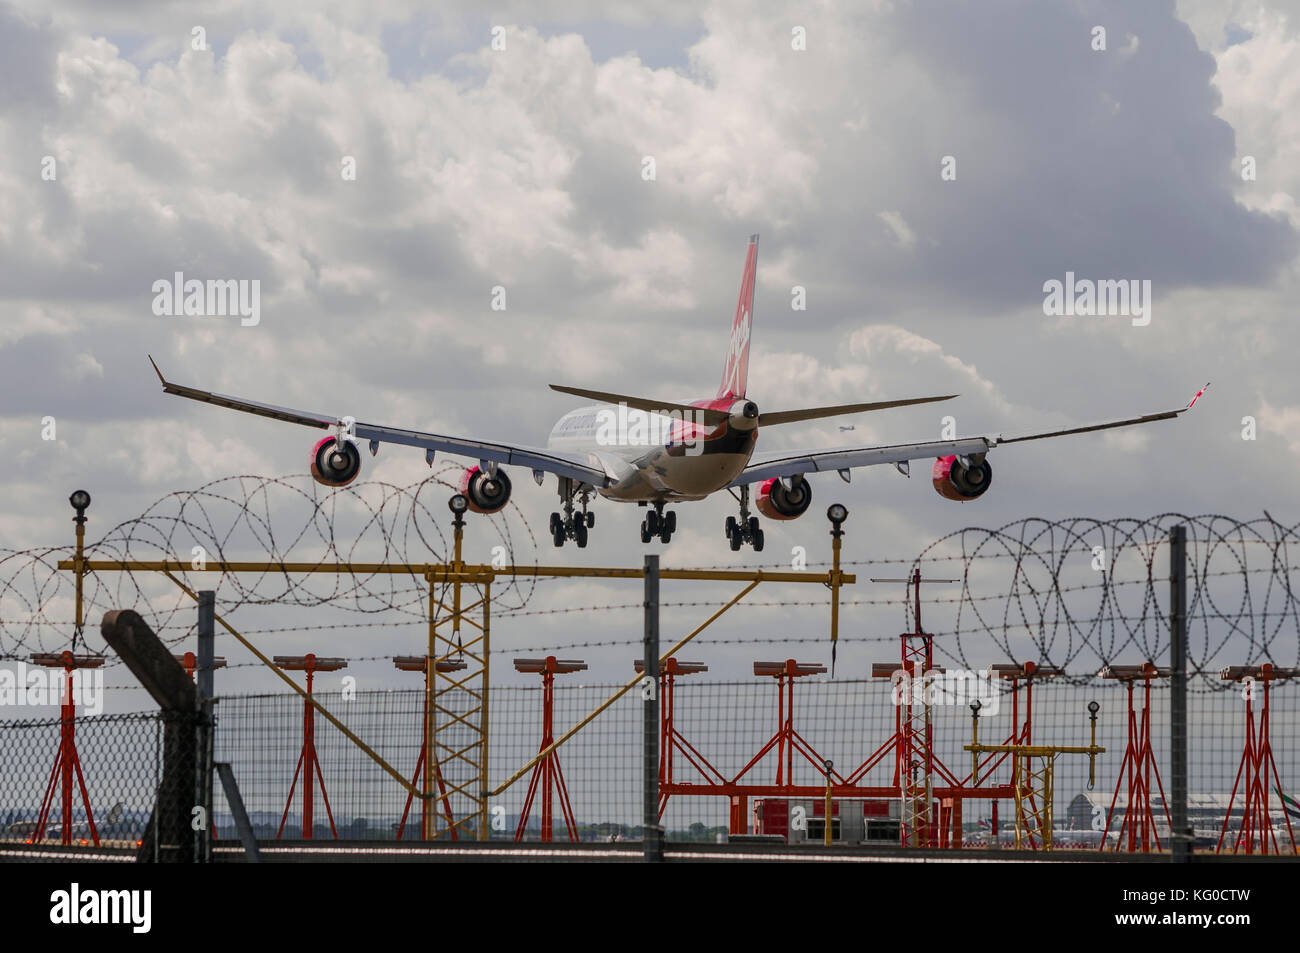 LONDON, UK - AUGUST, 3 2013; A Virgin Atlantic Airbus A340 landing at Heathrow airport in London, UK over the airport security fences. Stock Photo